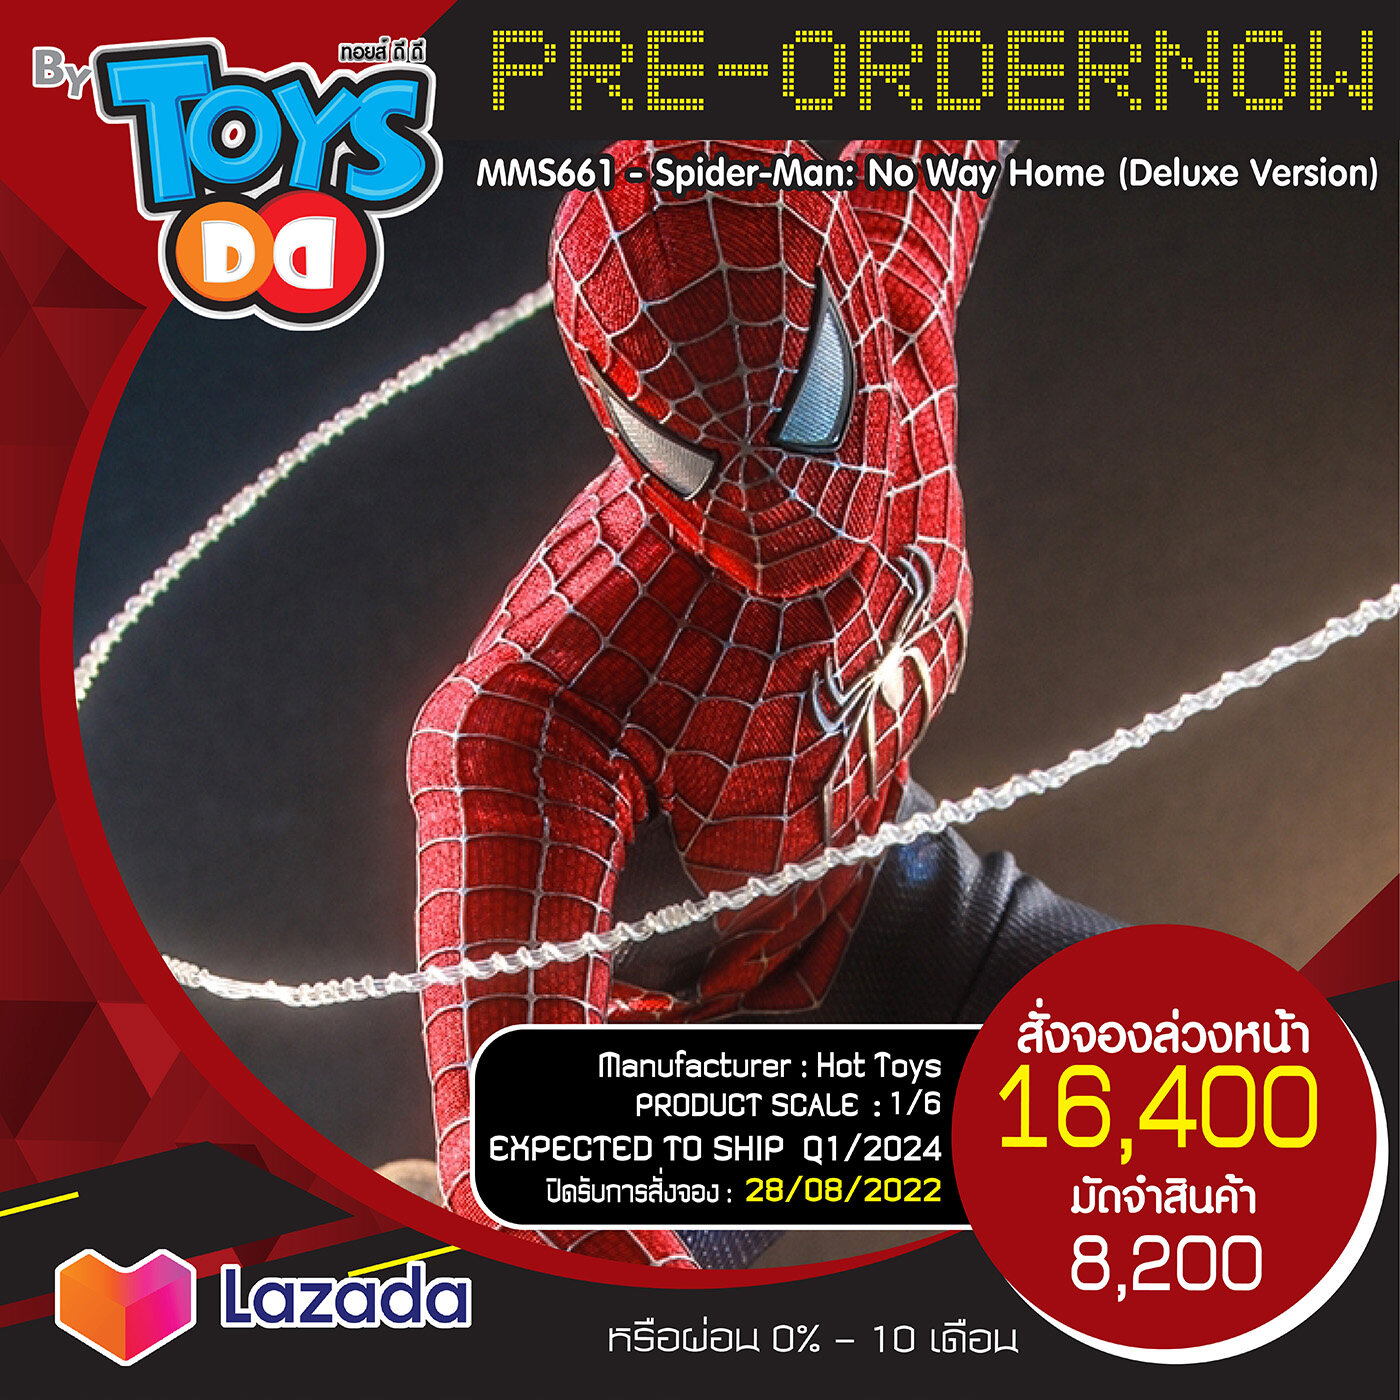 Hot Toys on X: #HotToys 1/6th scale #SpiderMan (Advanced Suit